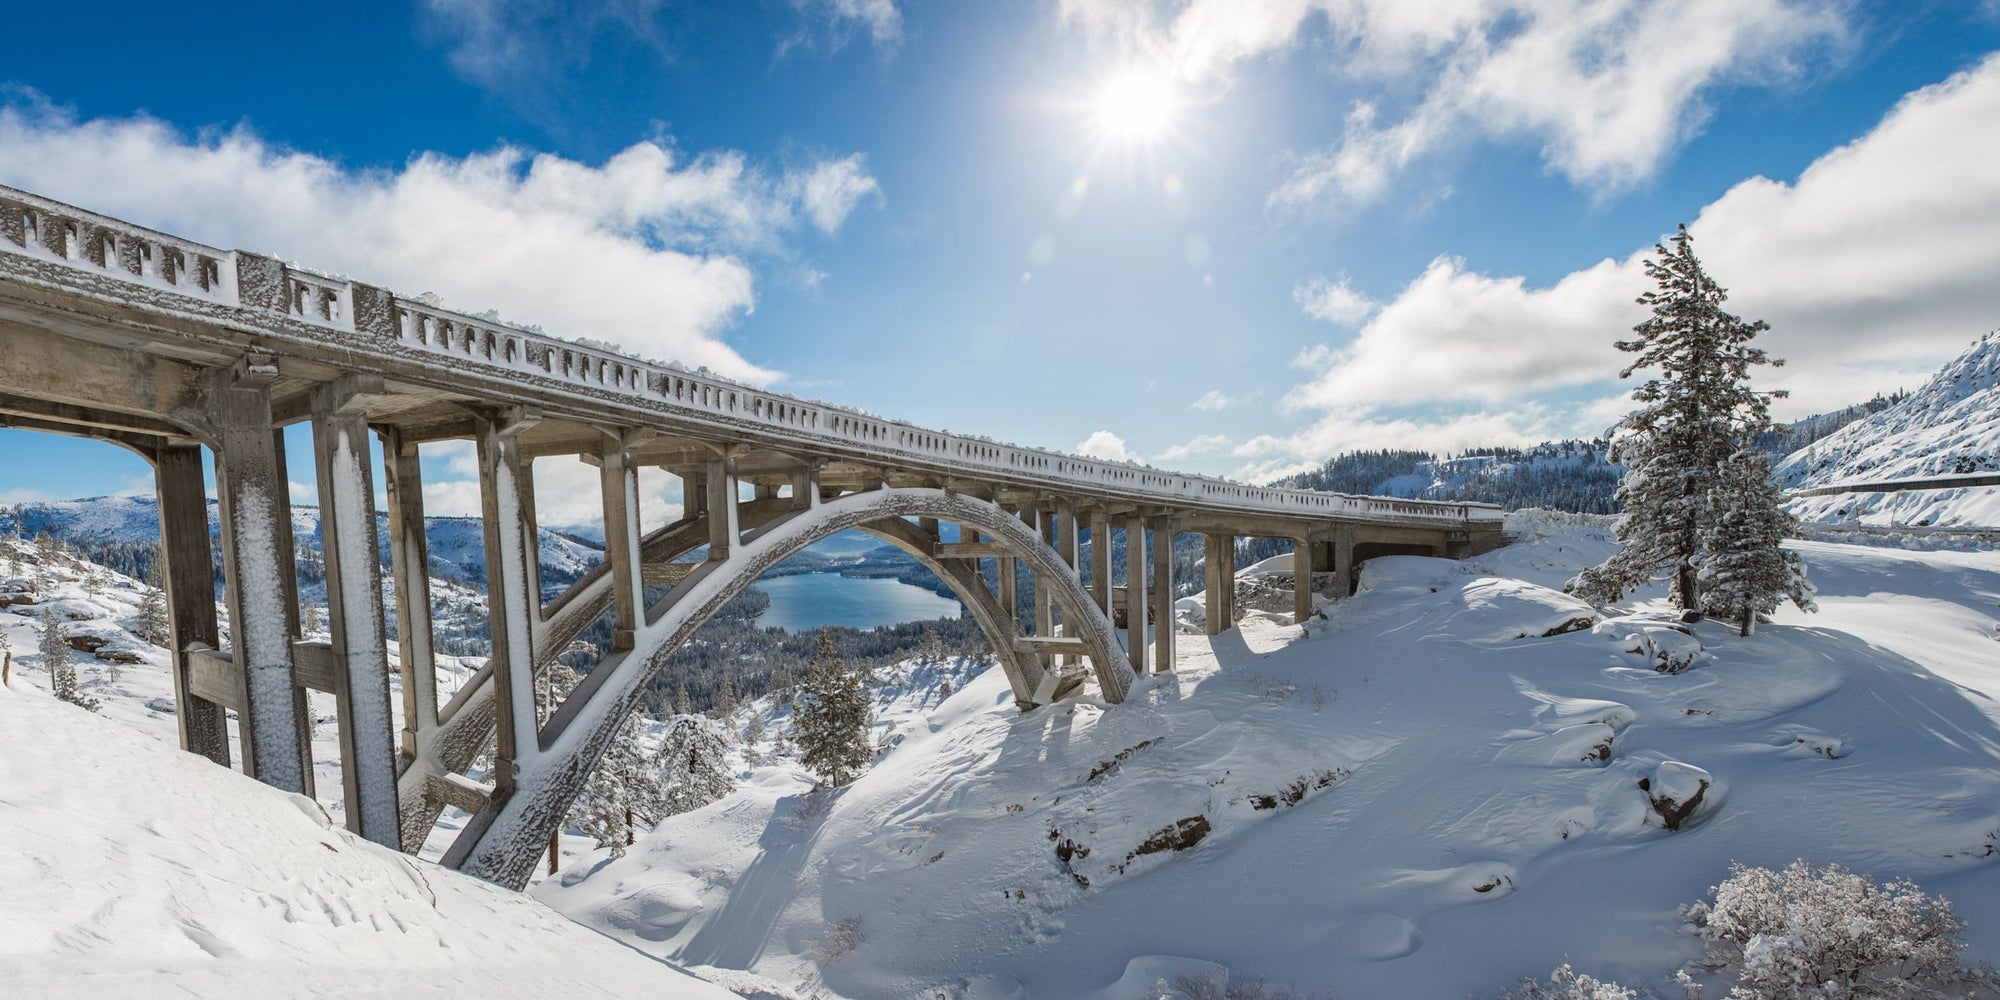 An arched bridge goes over a snowy gap above a lake.